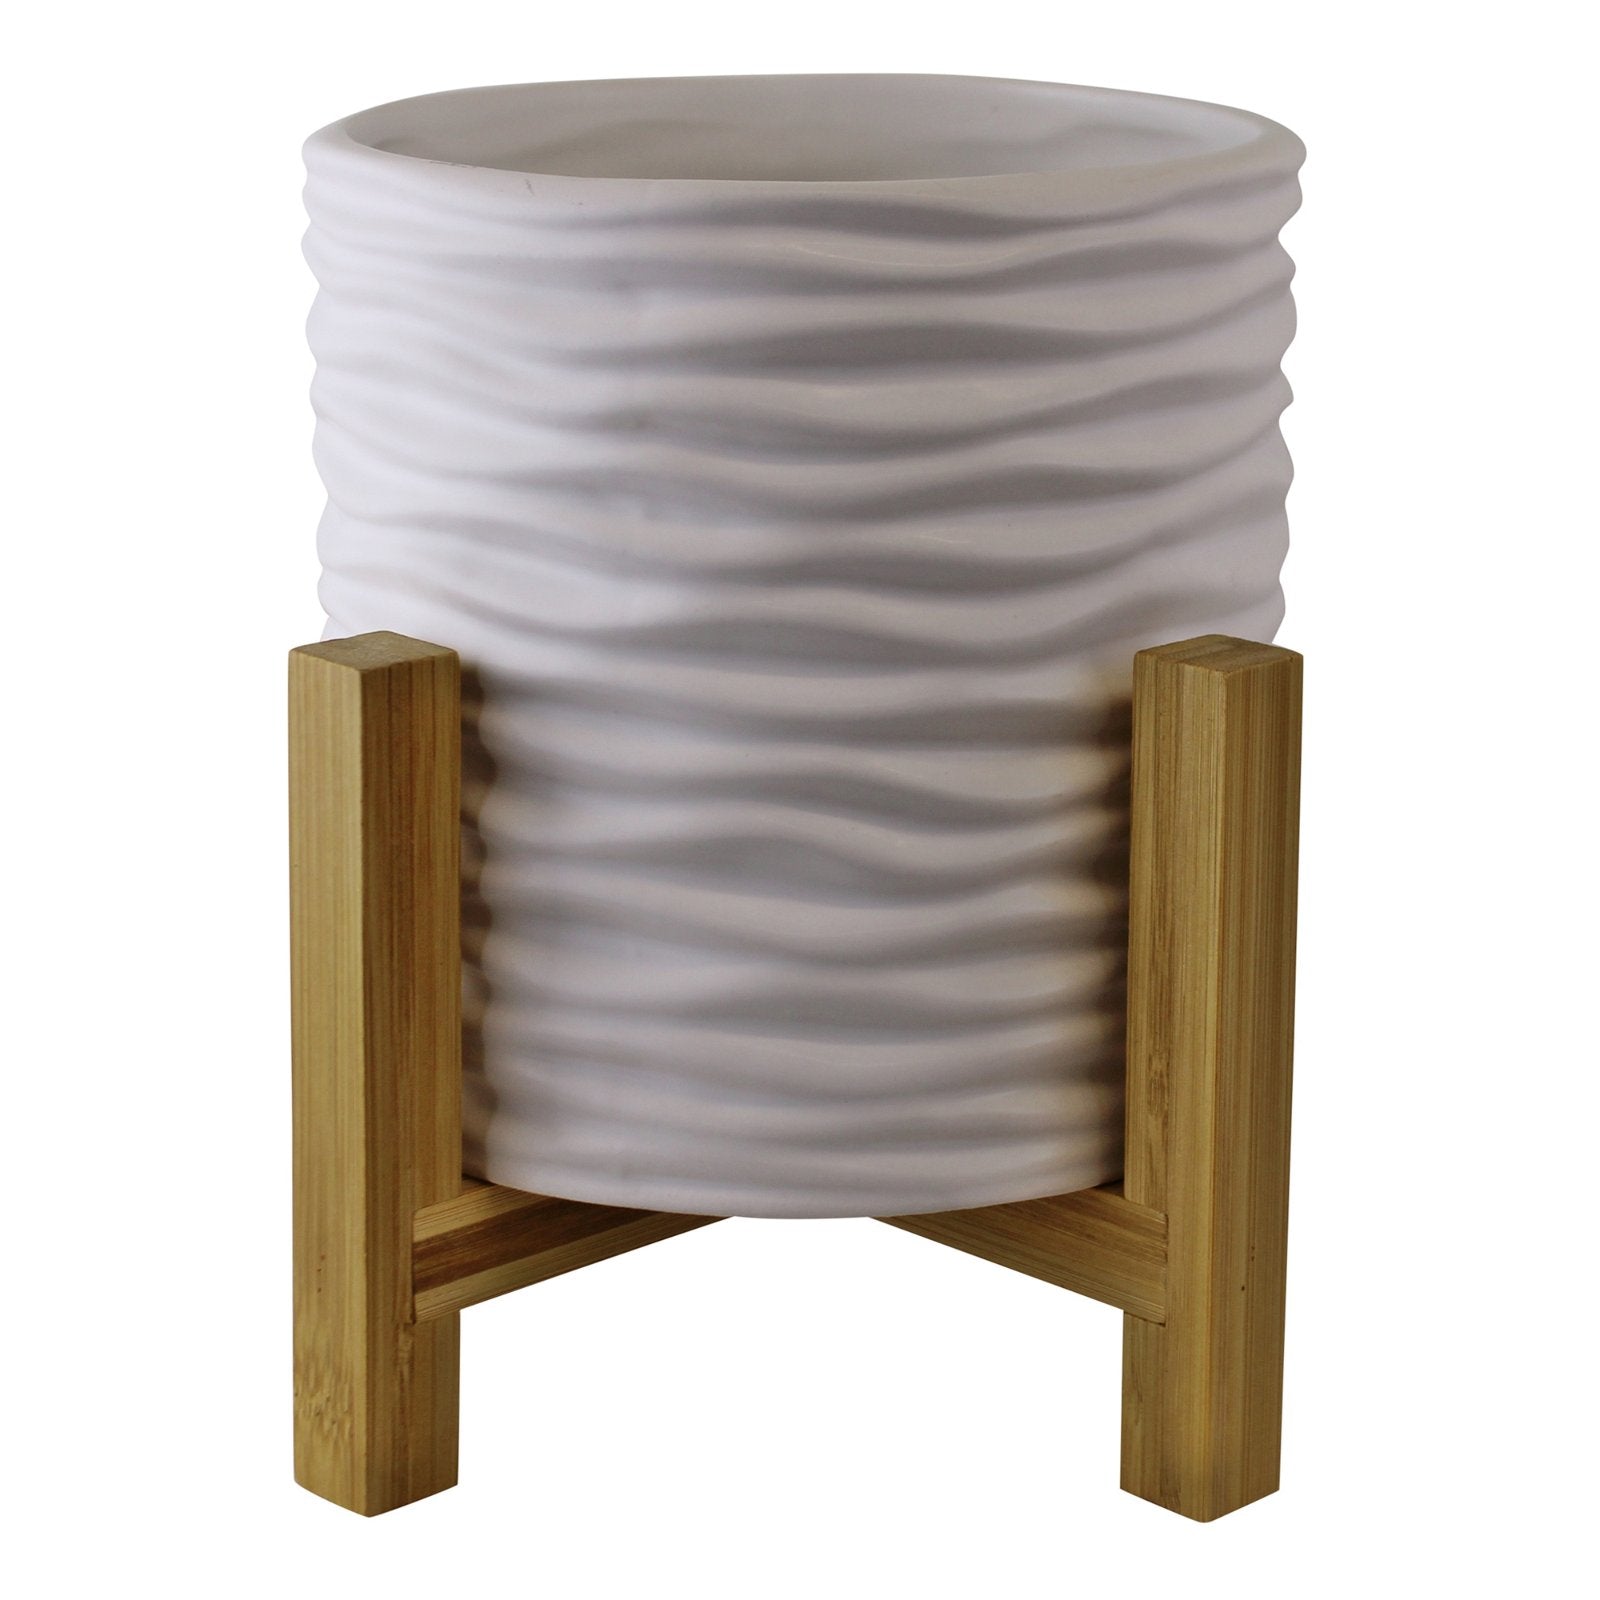 Small White Stoneware Planter On Wooden Stand